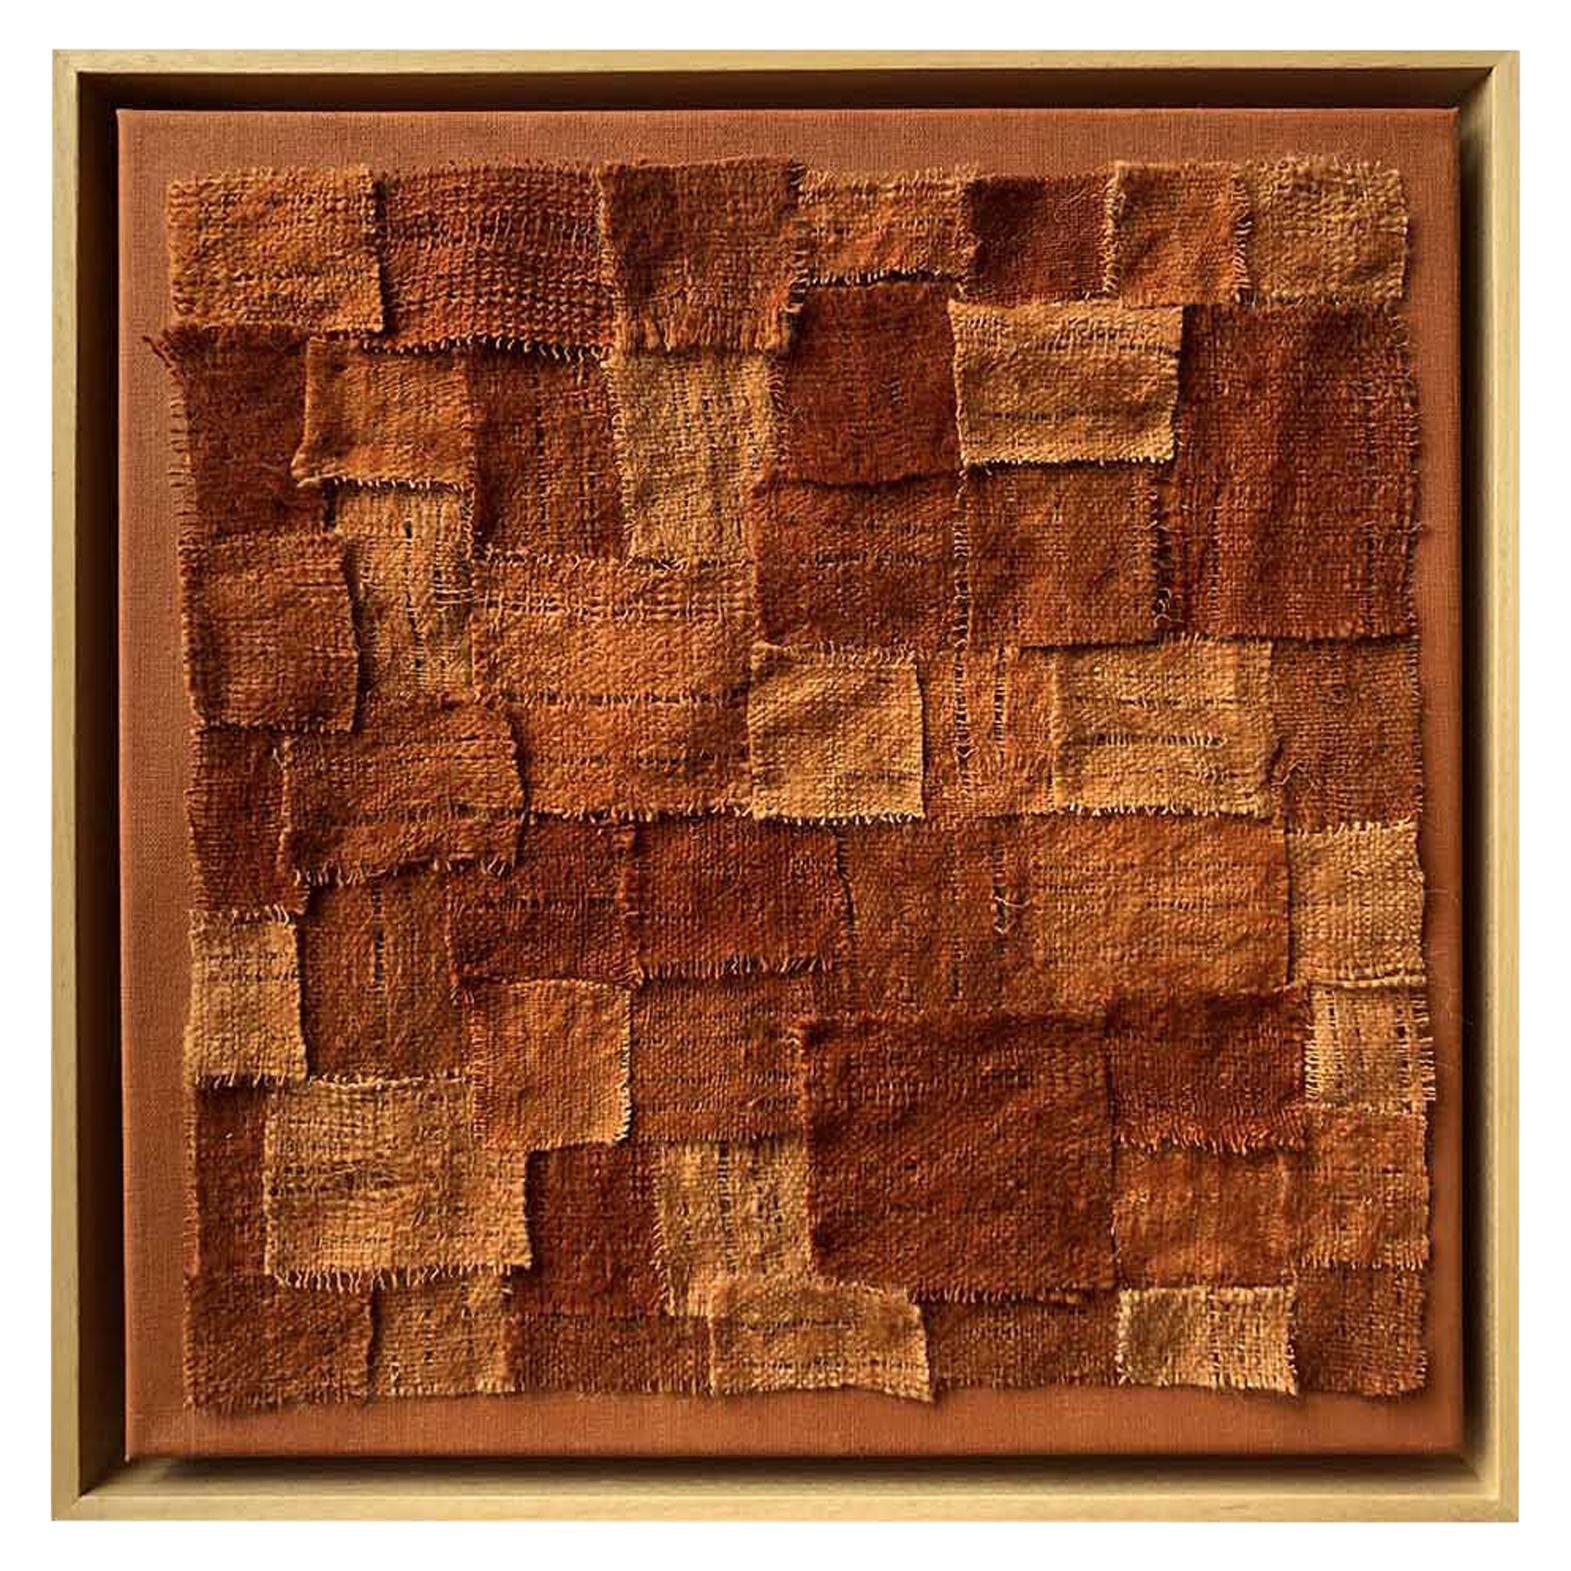 Patchwork Brown and Orange Textile artwork Wall Piece, Made of Wool natural dyes